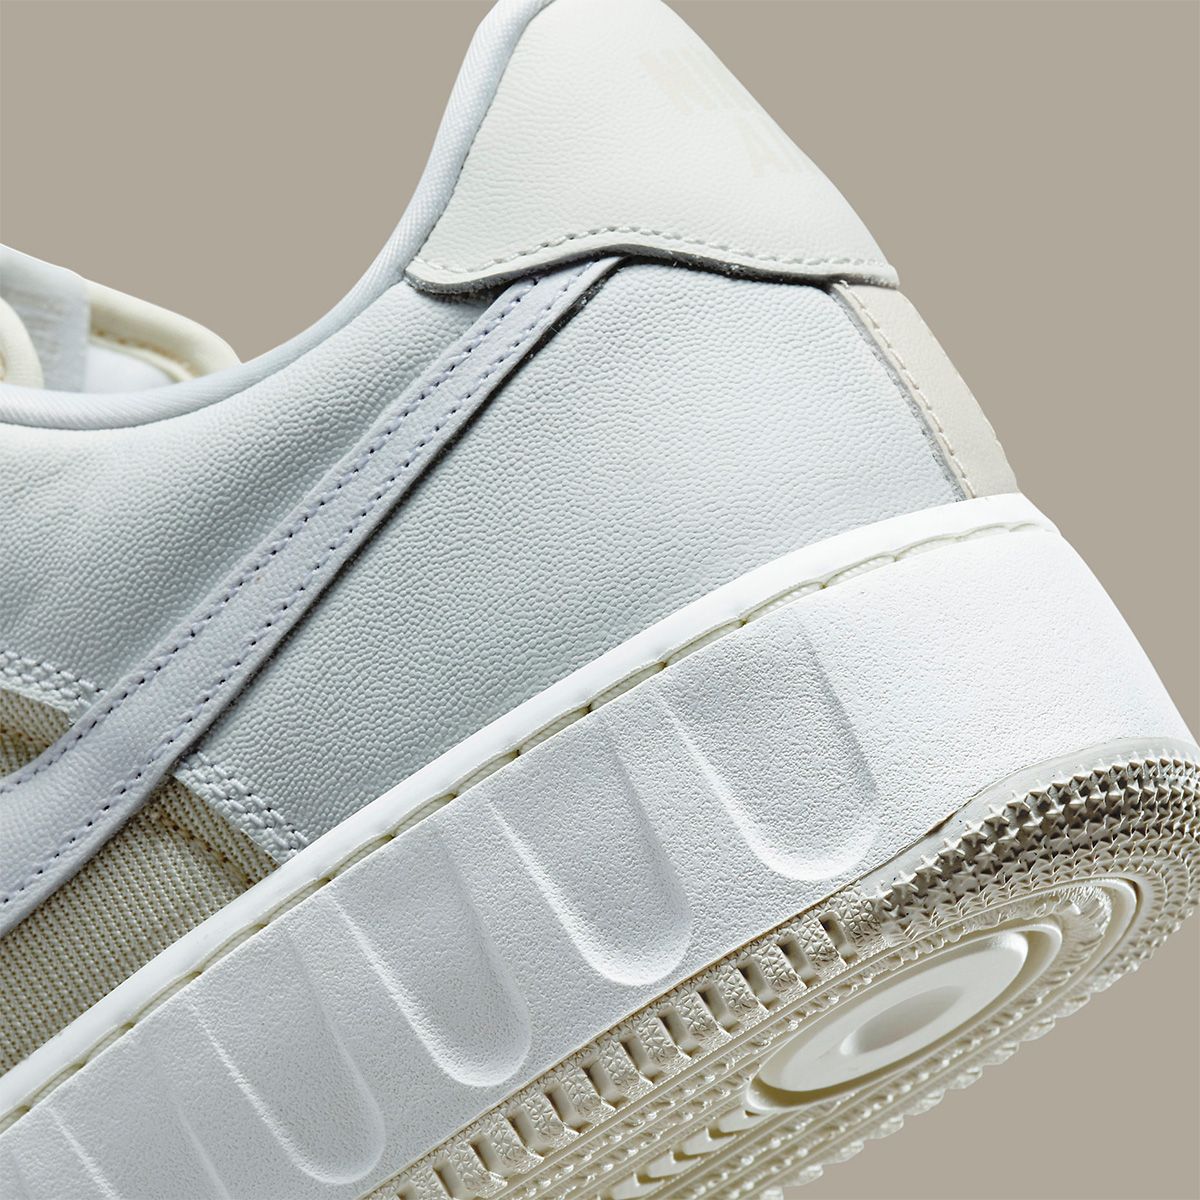 First Looks // Nike Air Force 1 Low Unity “Sail” | House of Heat°